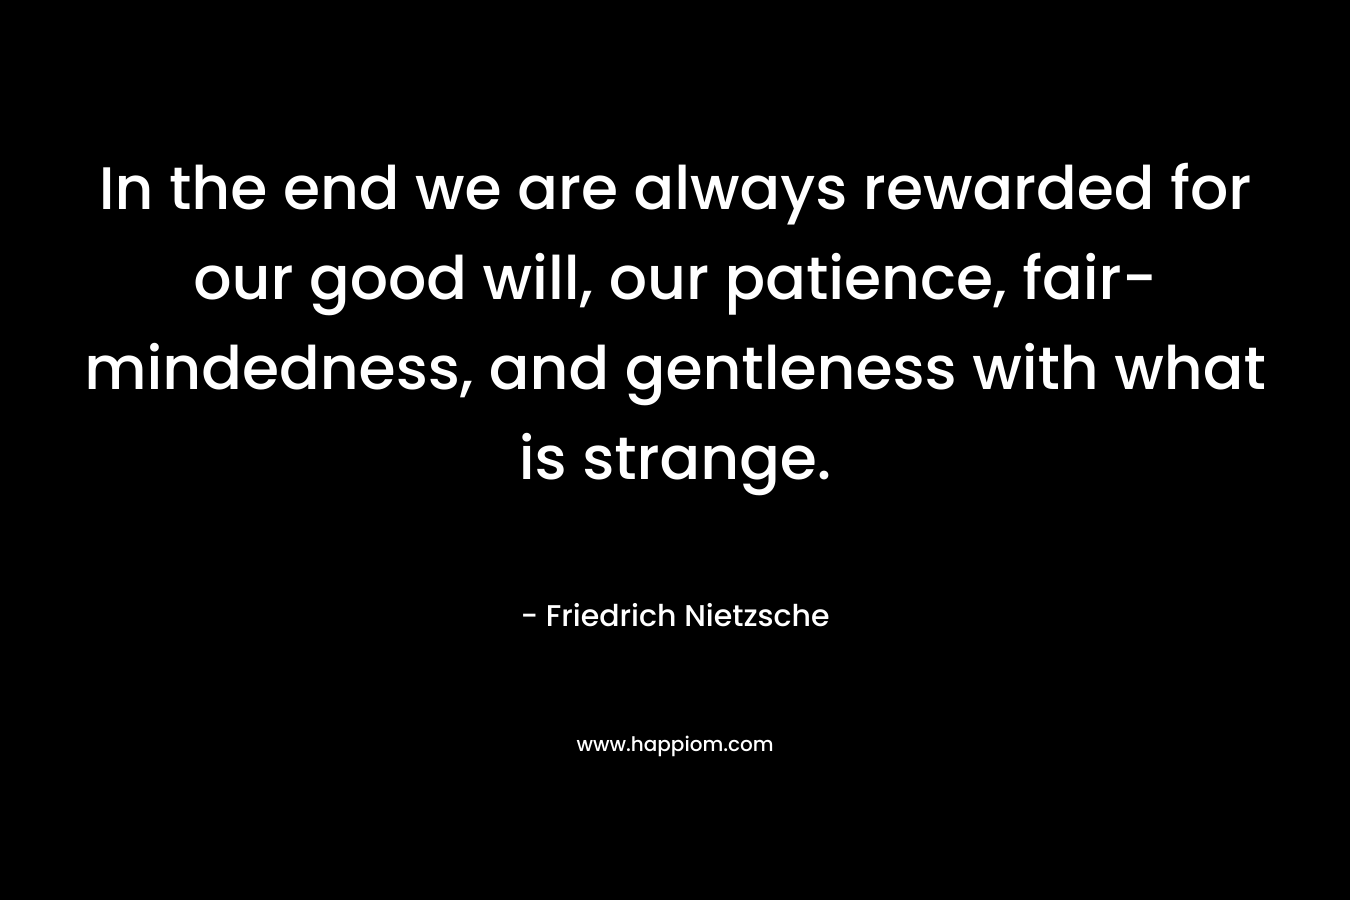 In the end we are always rewarded for our good will, our patience, fair-mindedness, and gentleness with what is strange. – Friedrich Nietzsche